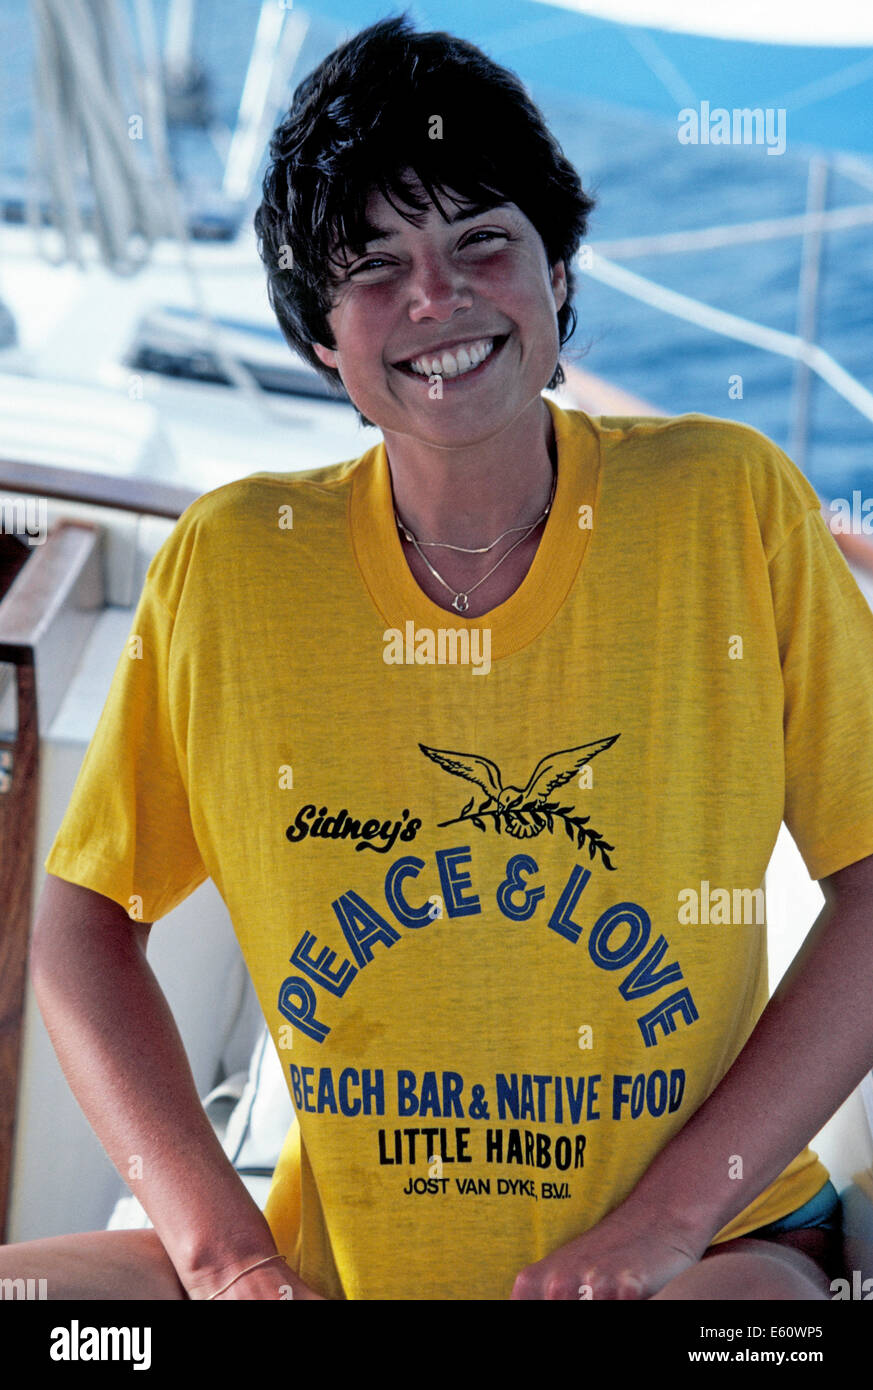 A smiling sailor proudly displays her souvenir T-shirt from Sidney's Peace & Love Beach Bar on Jost Van Dyke in the British Virgin Islands (BVIs). Stock Photo